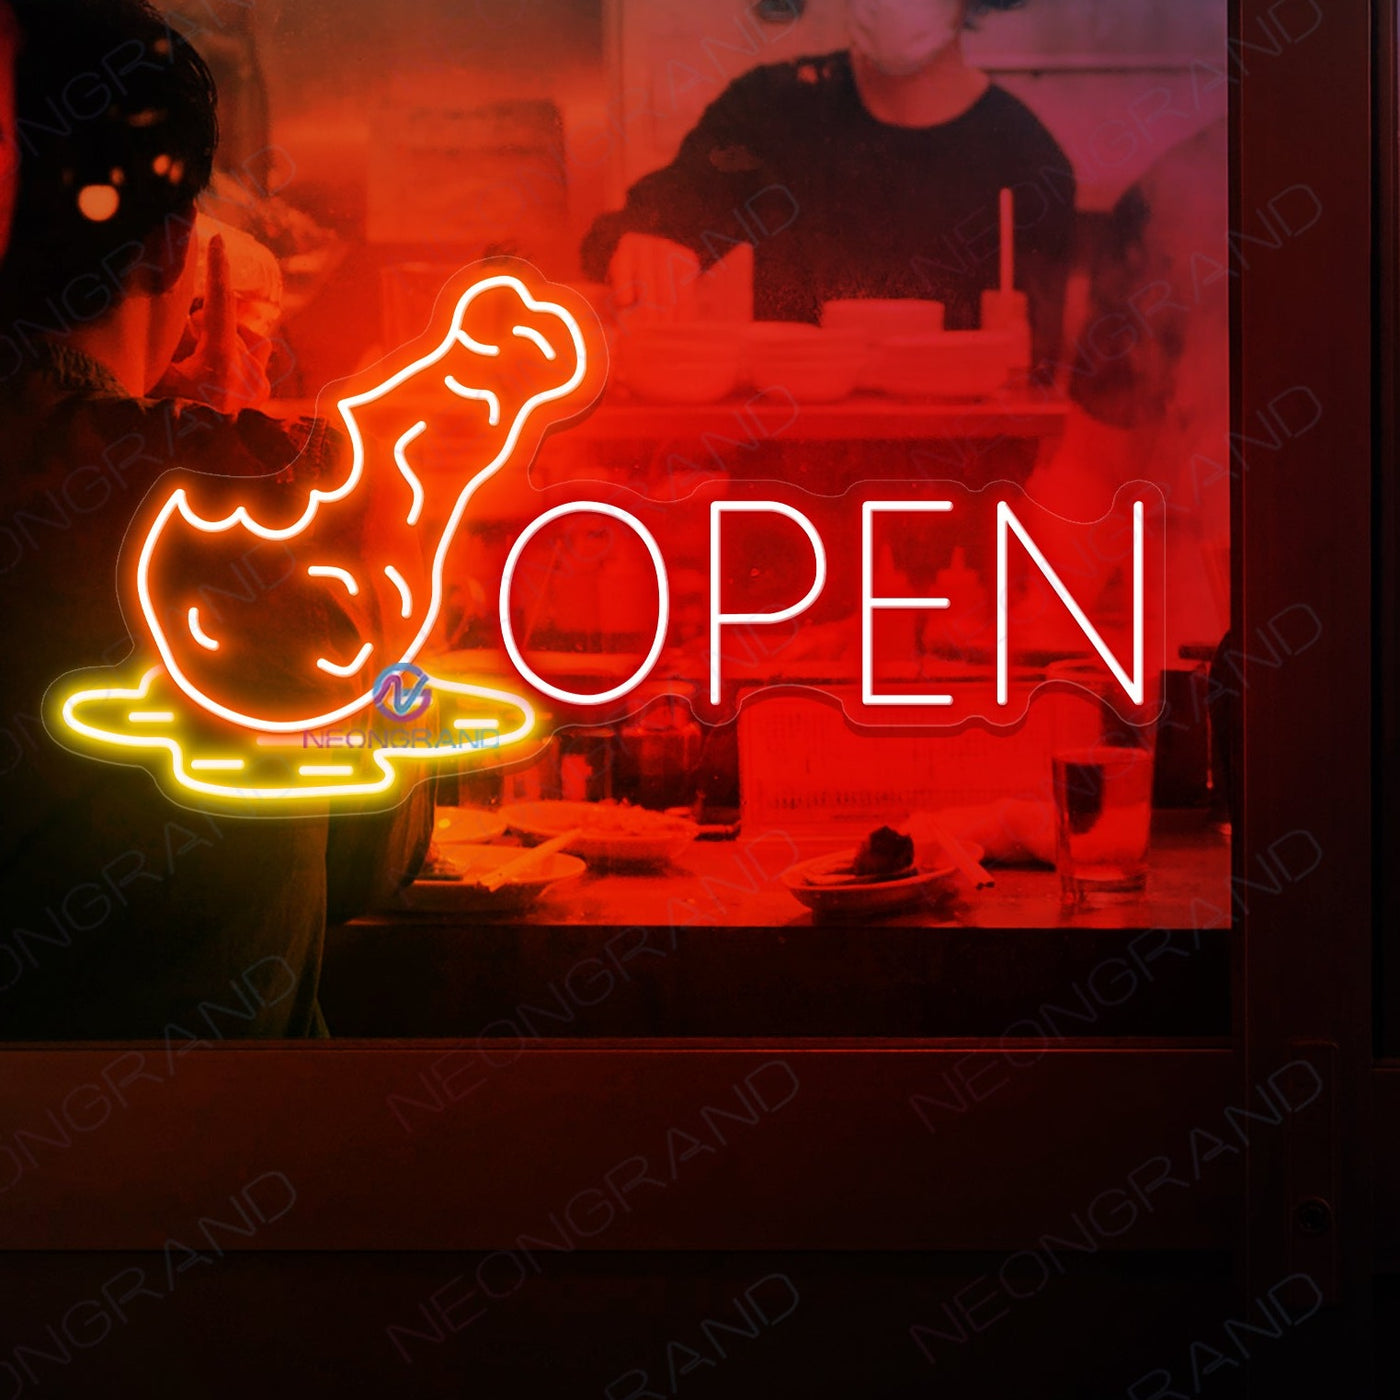 Fried Chicken Open Neon Signs Led Light red